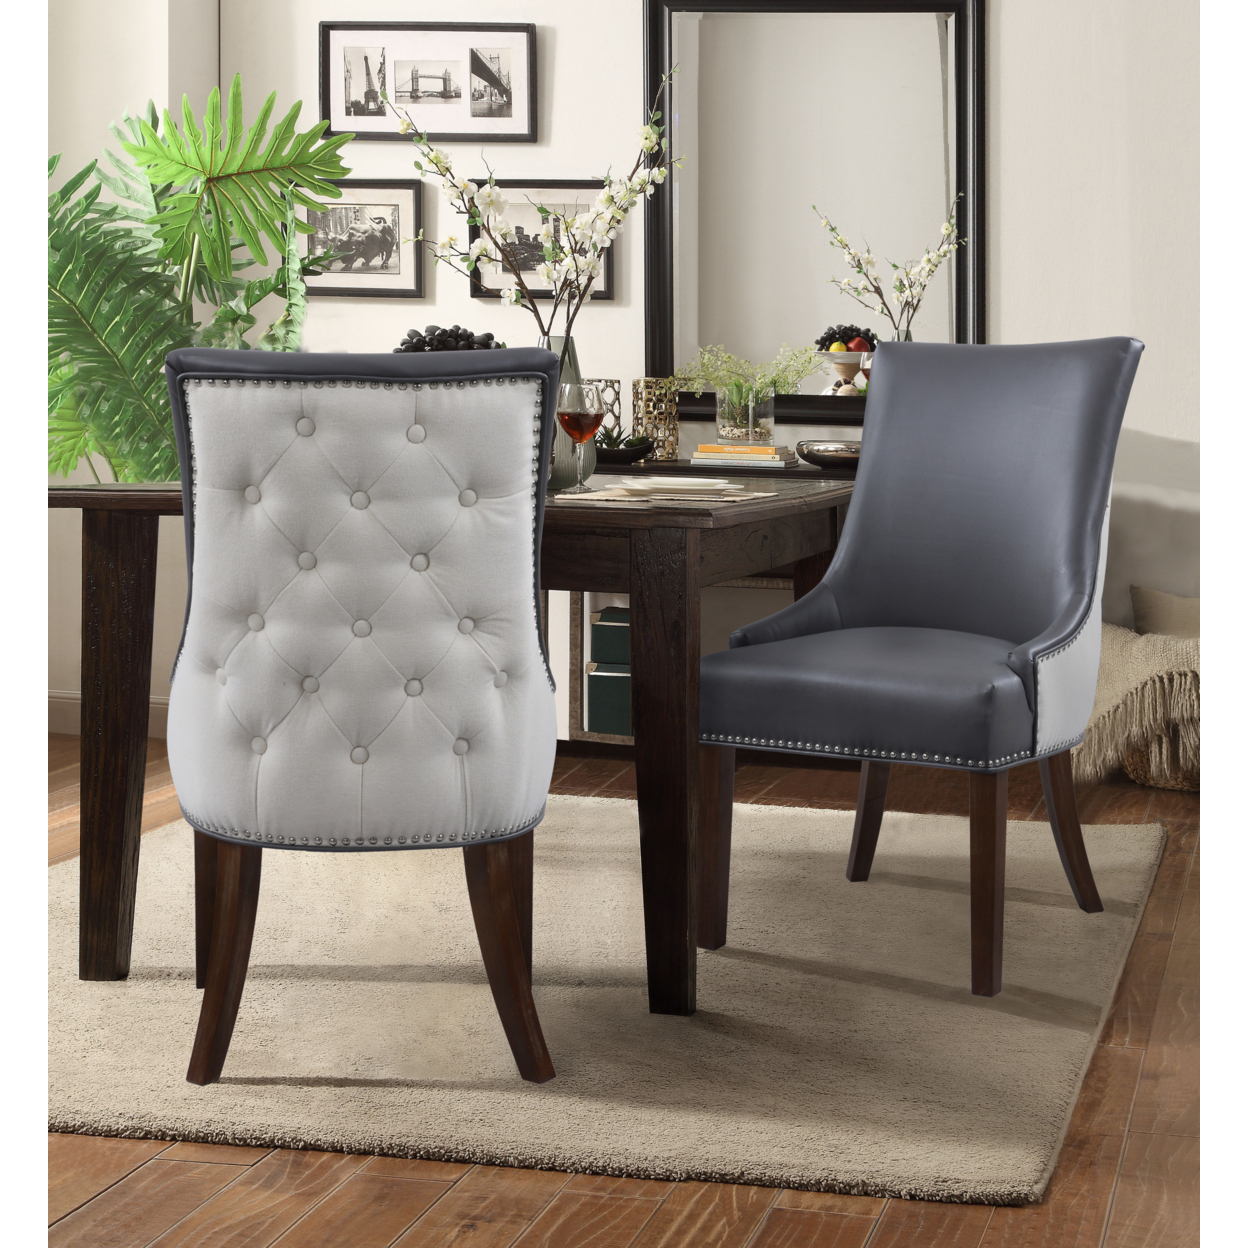 Taylor PU Leather Dining Chair, Set Of 2, Linen Button Tufted With Silver Nailhead Solid Birch Legs - Grey